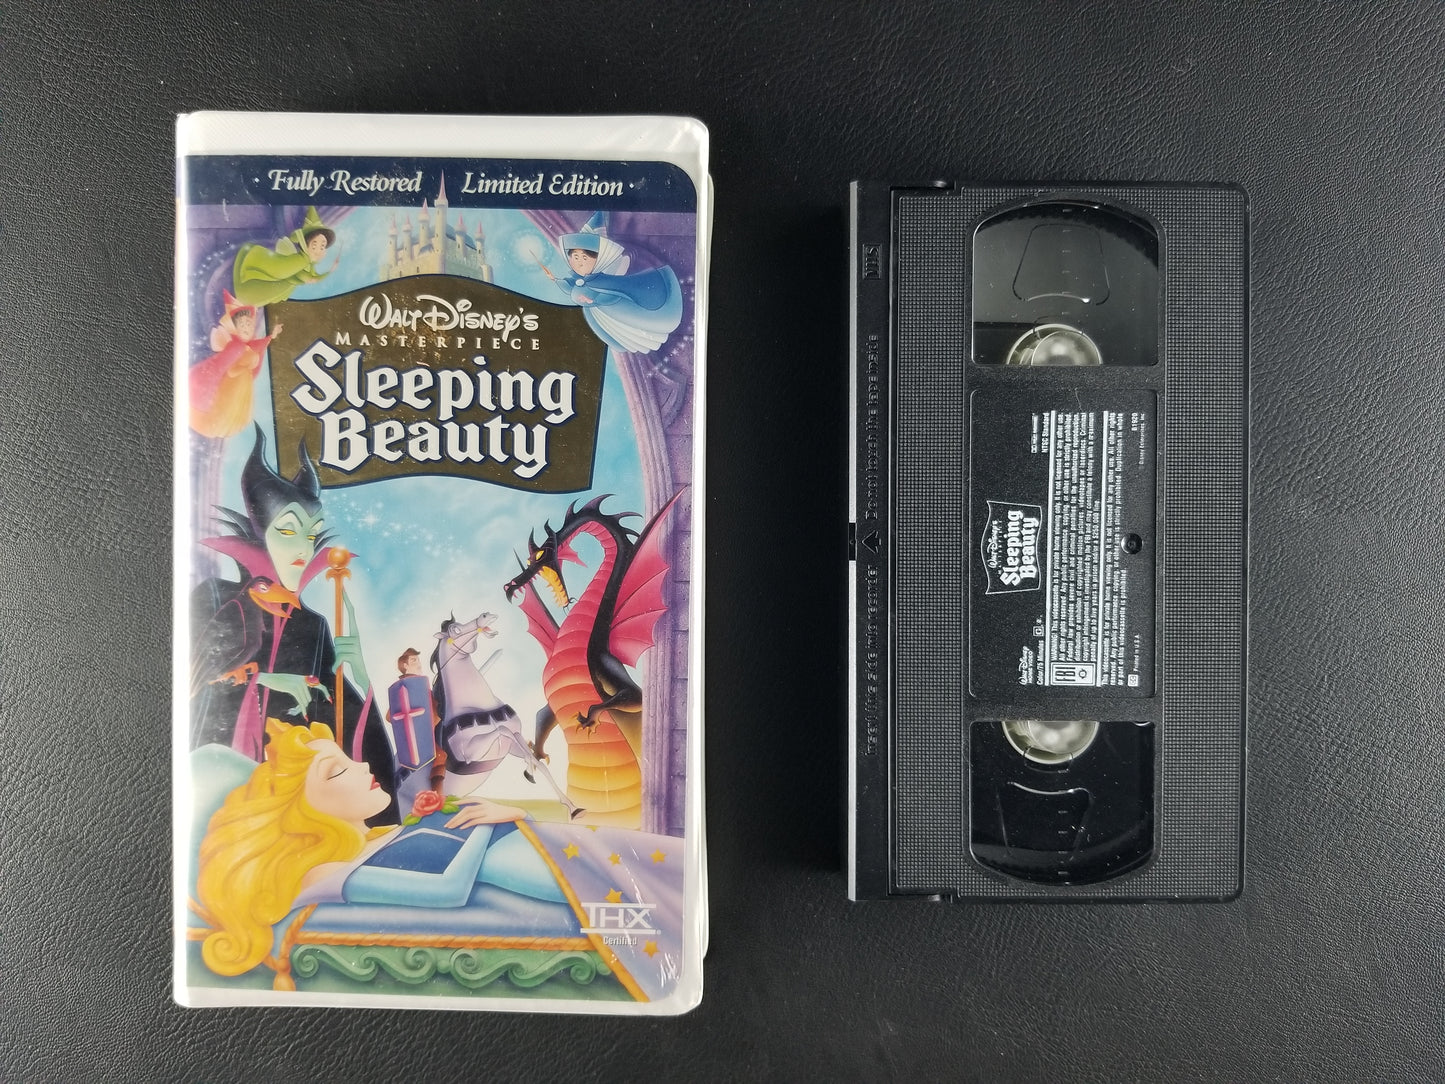 Sleeping Beauty (1997, VHS, Limited Edition)